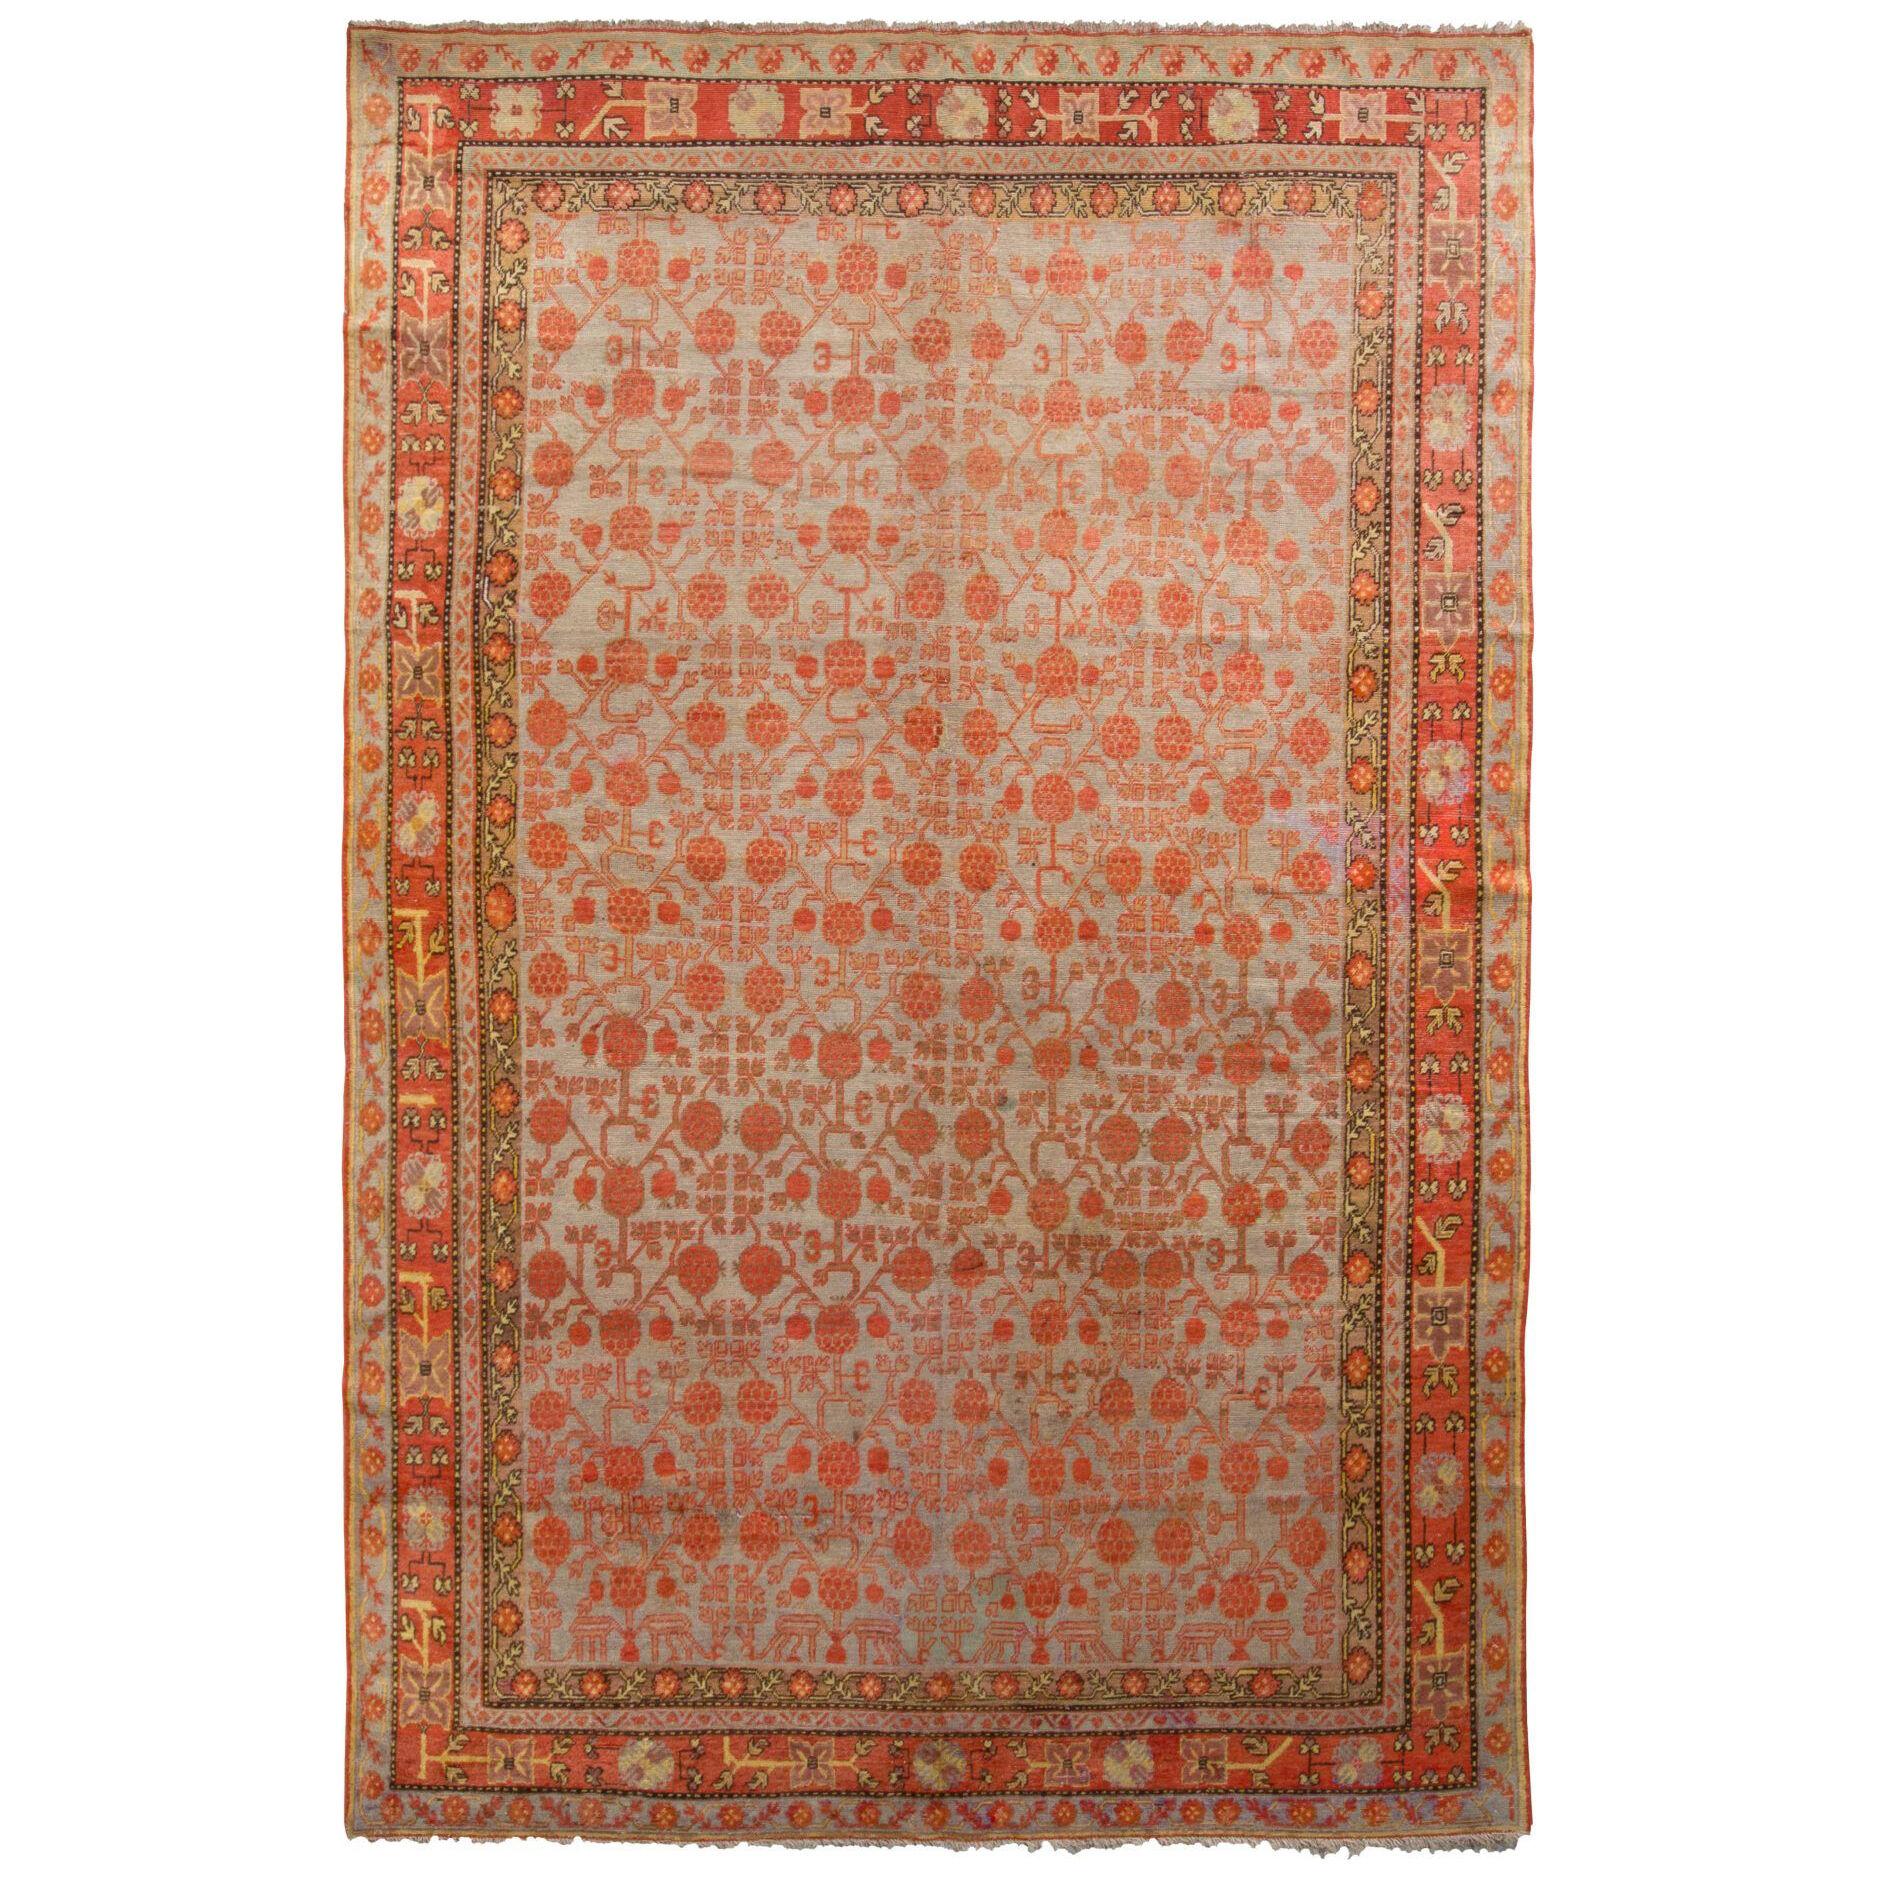 Hand-Knotted Antique Khotan Rug In Green And Orange Floral Pattern